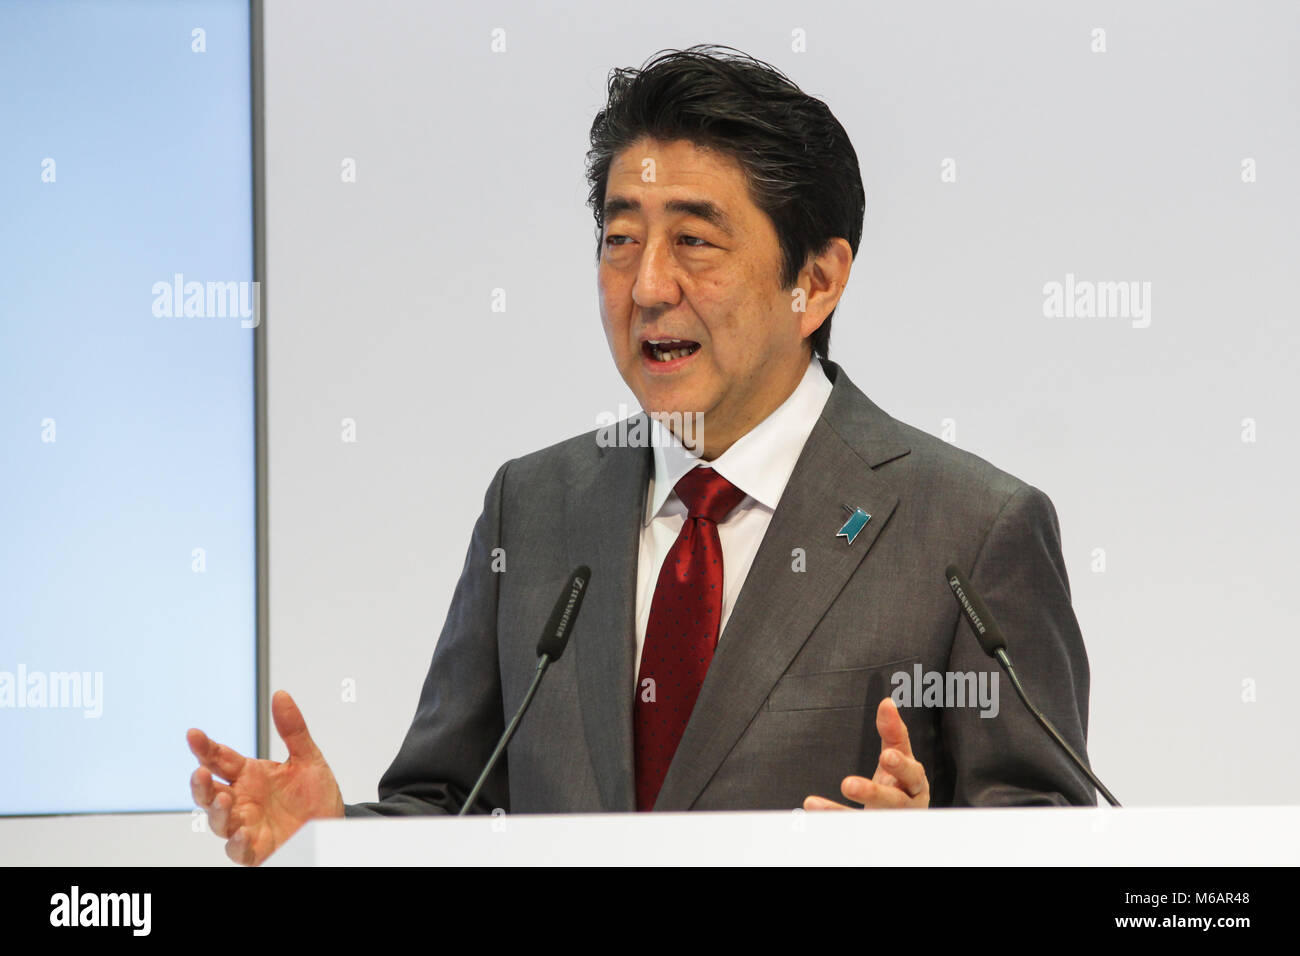 Hanover, Germany. 20th March, 2017. CeBIT 2017, ICT trade fair: Shinzo Abe, Prime Minister of Japan, speaks at opening walk at booth of CeBIT 2017-partner country Japan. Credit: Christian Lademann Stock Photo